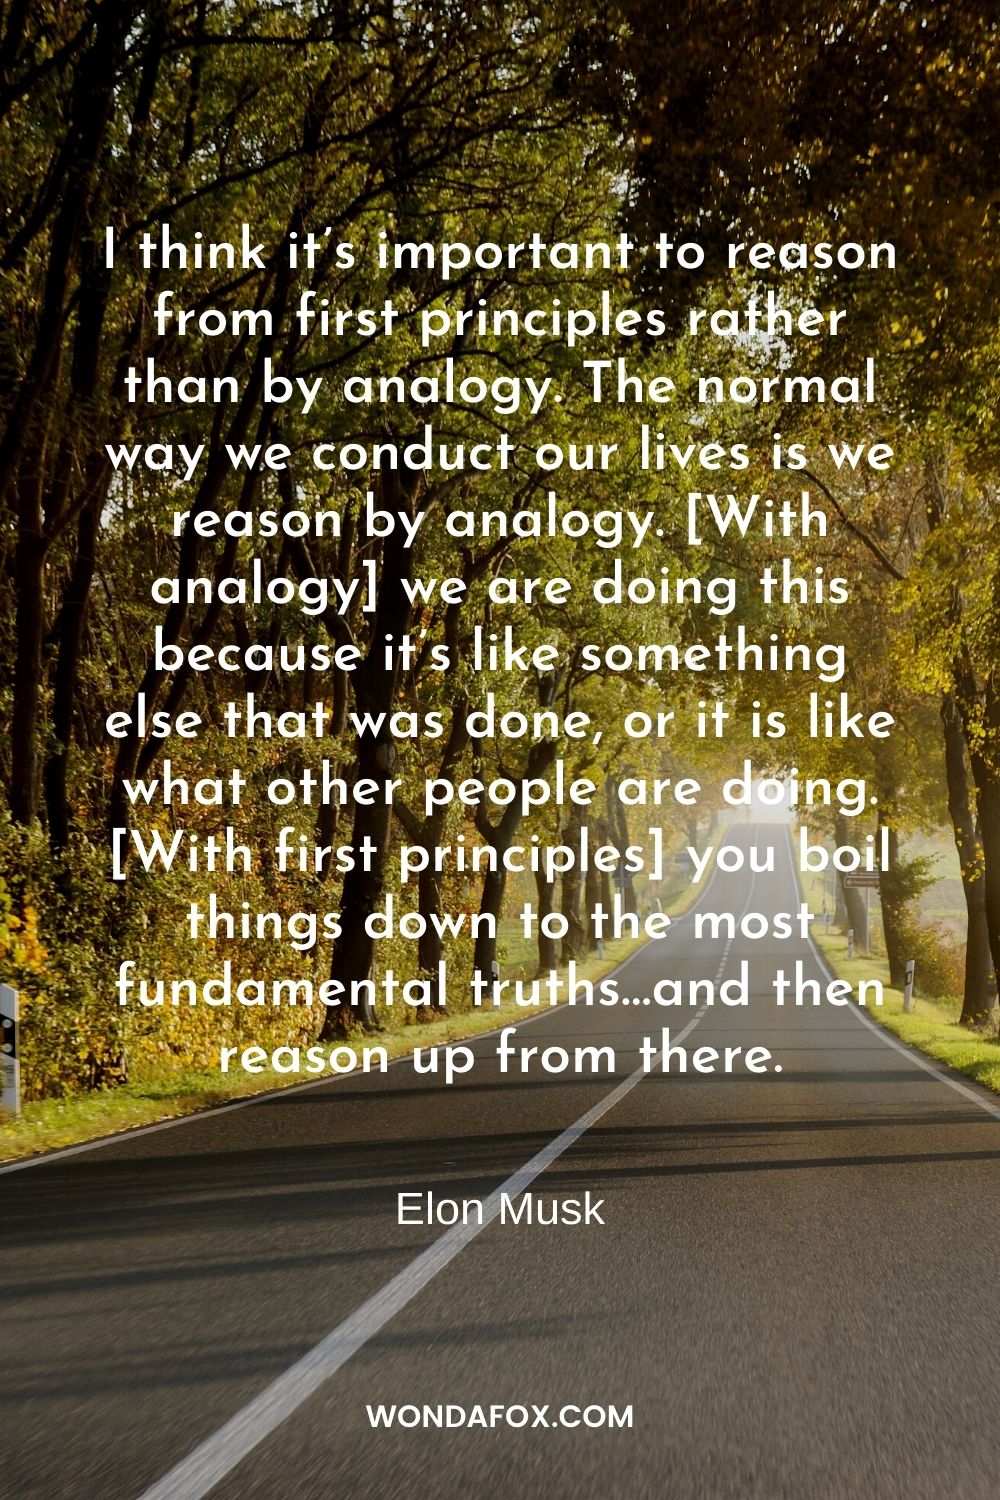 I think it’s important to reason from first principles rather than by analogy. The normal way we conduct our lives is we reason by analogy. [With analogy] we are doing this because it’s like something else that was done, or it is like what other people are doing. [With first principles] you boil things down to the most fundamental truths…and then reason up from there.